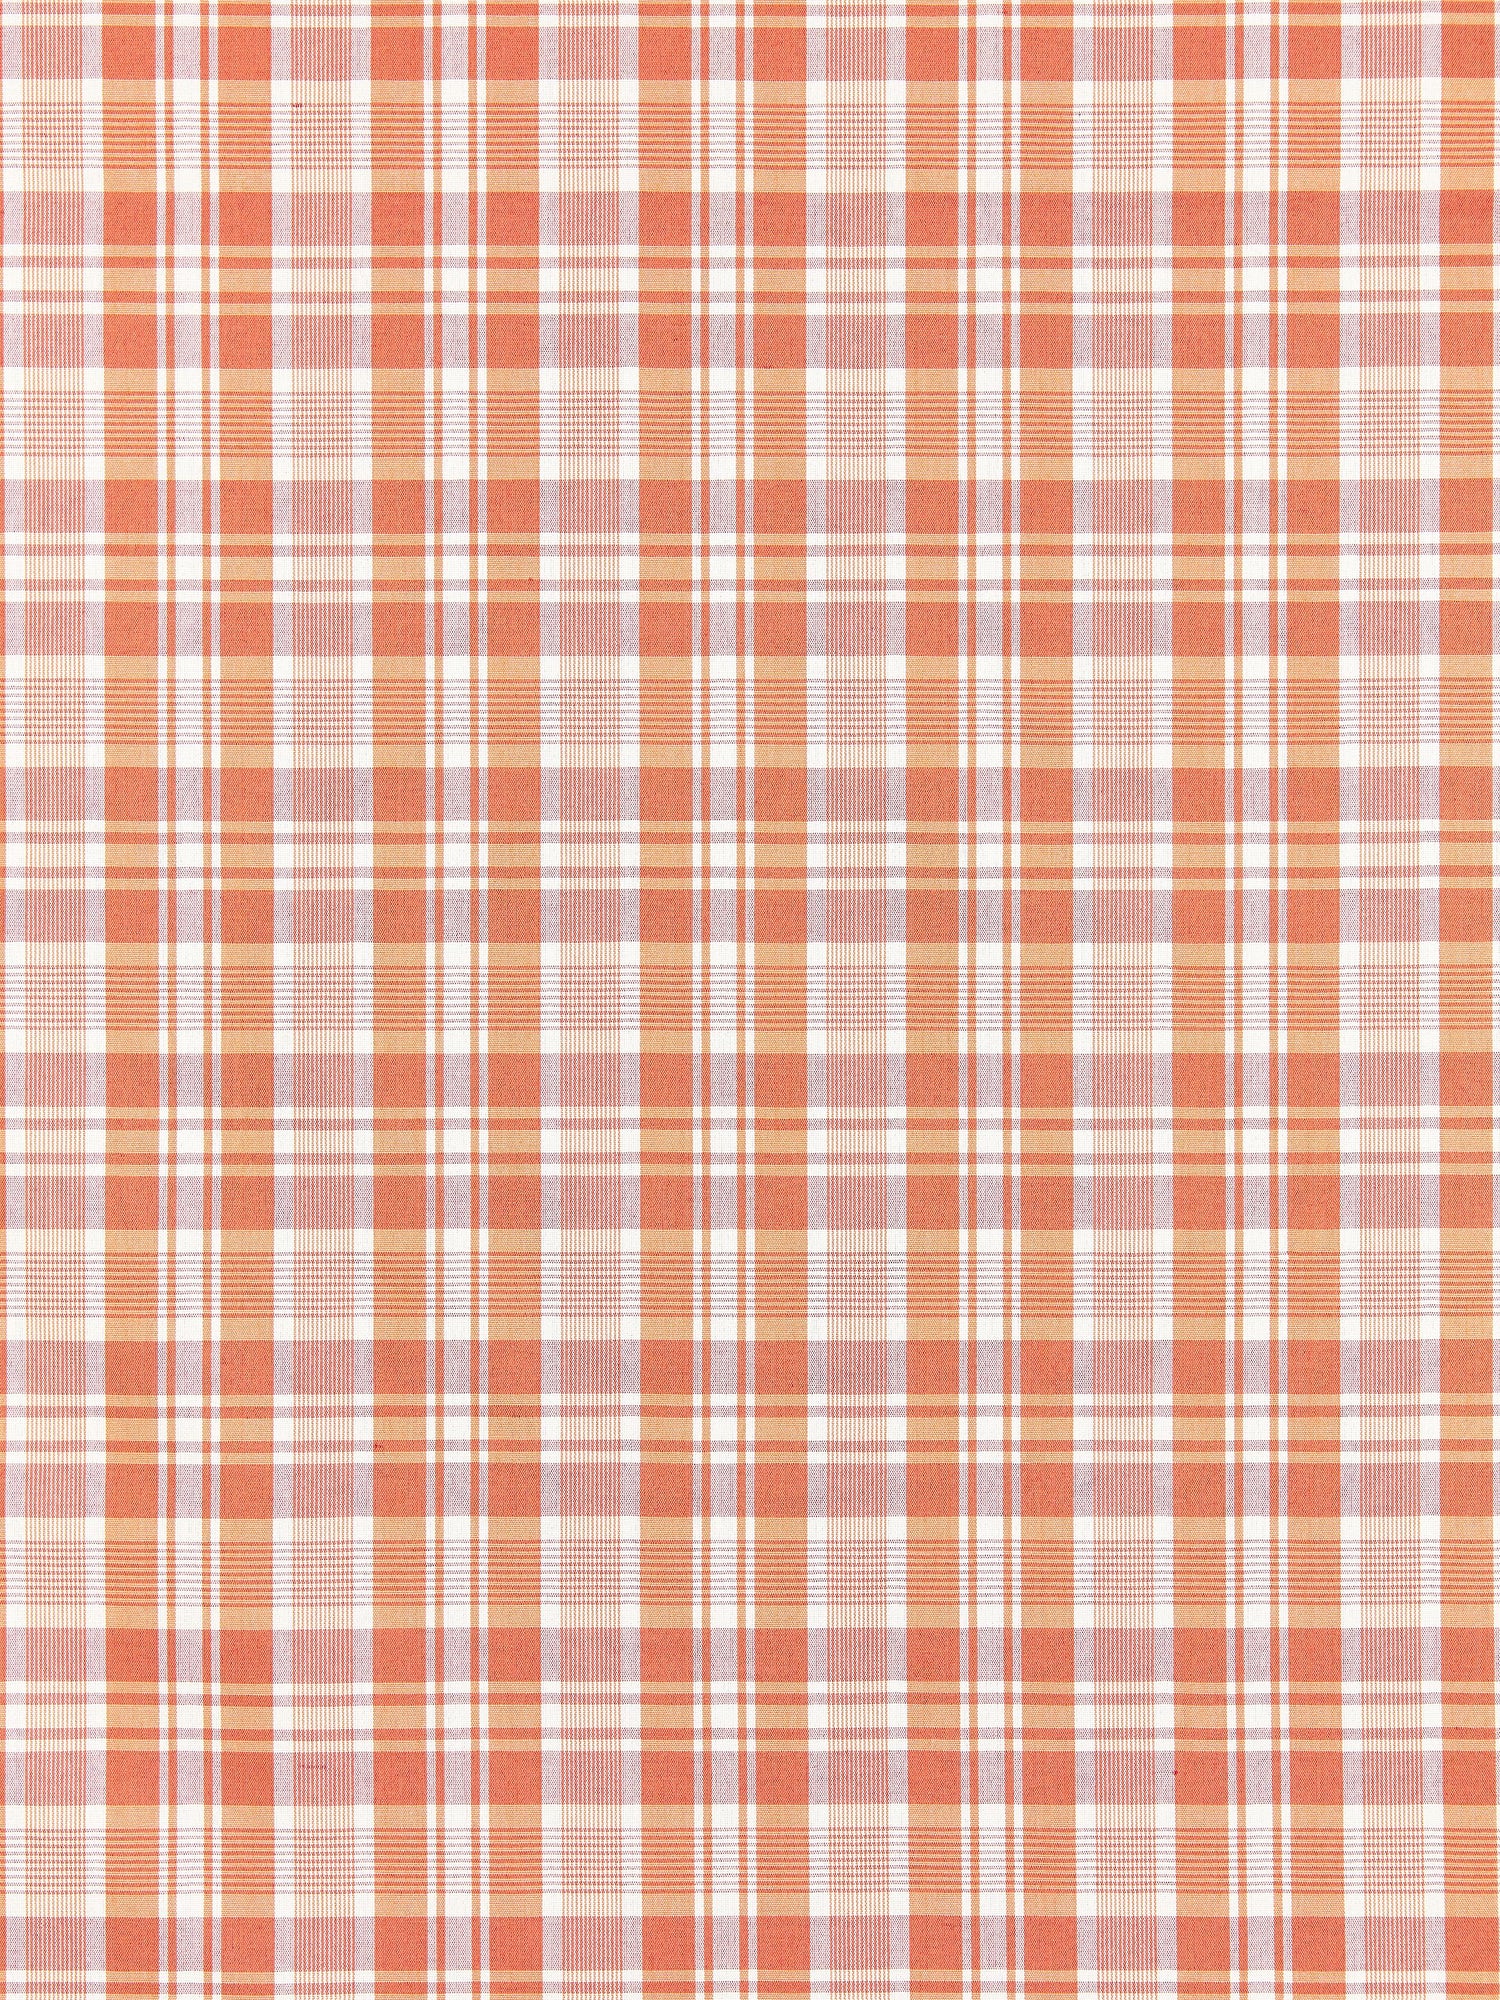 Preston Cotton Plaid fabric in bellini color - pattern number SC 000227122 - by Scalamandre in the Scalamandre Fabrics Book 1 collection